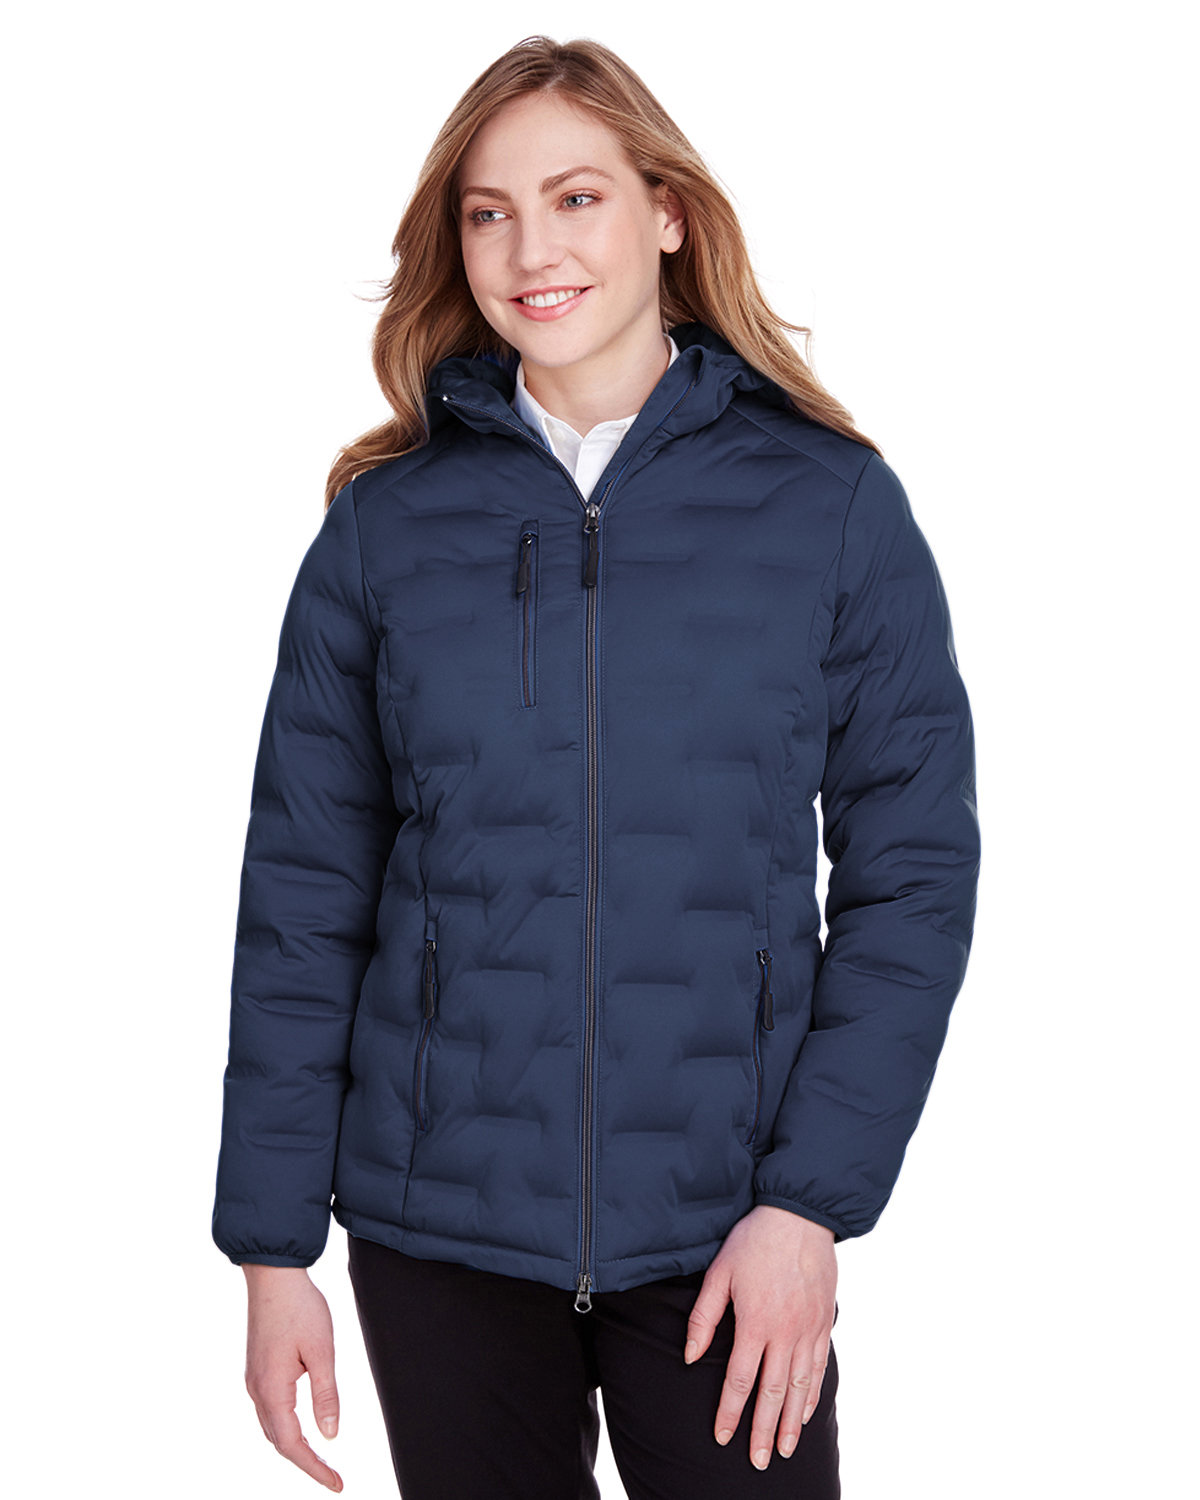 North End Ladies' Loft Puffer Jacket CLASSC NVY/ CRBN 